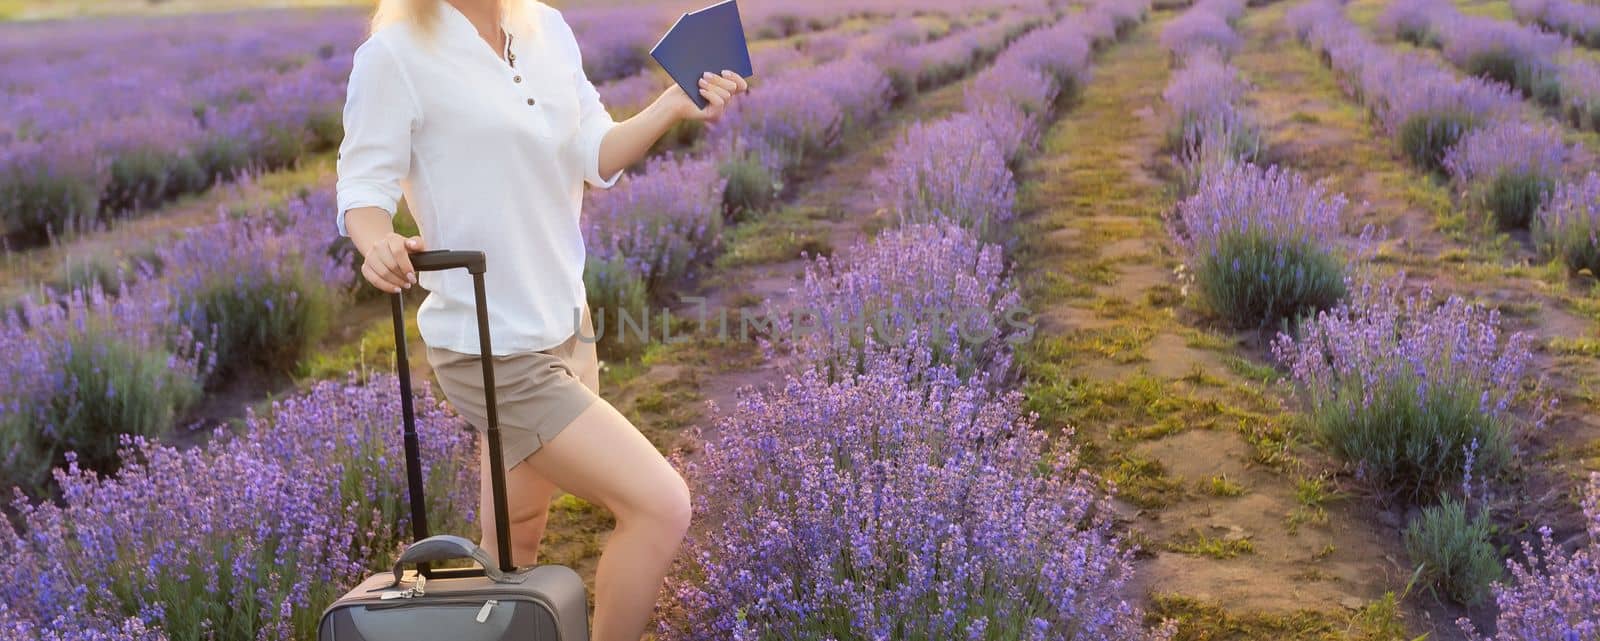 woman with suitcase and passport in lavender field by Andelov13